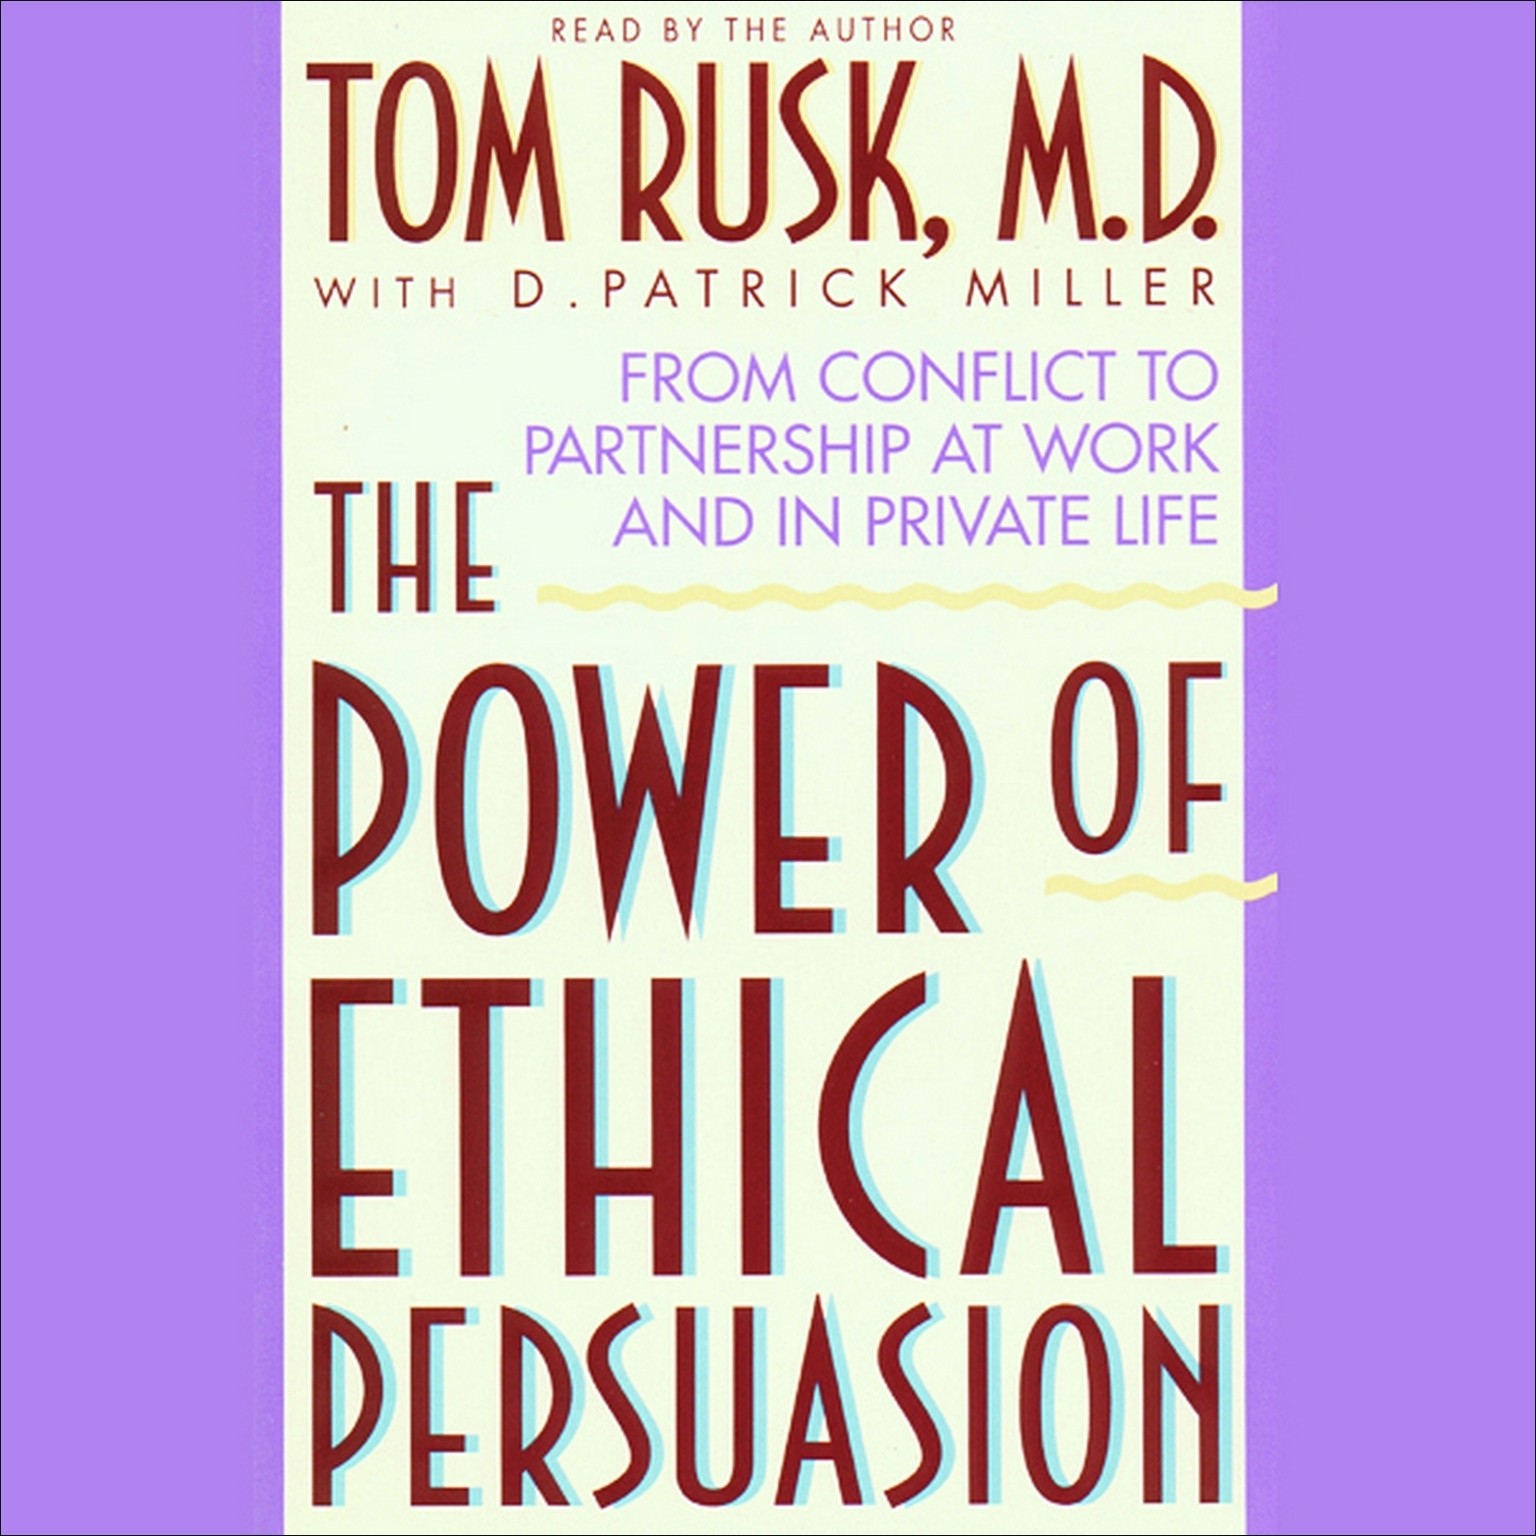 The Power of Ethical Persuasion (Abridged): From Conflict to Partnership at Work and in Private Life Audiobook, by Tom Rusk